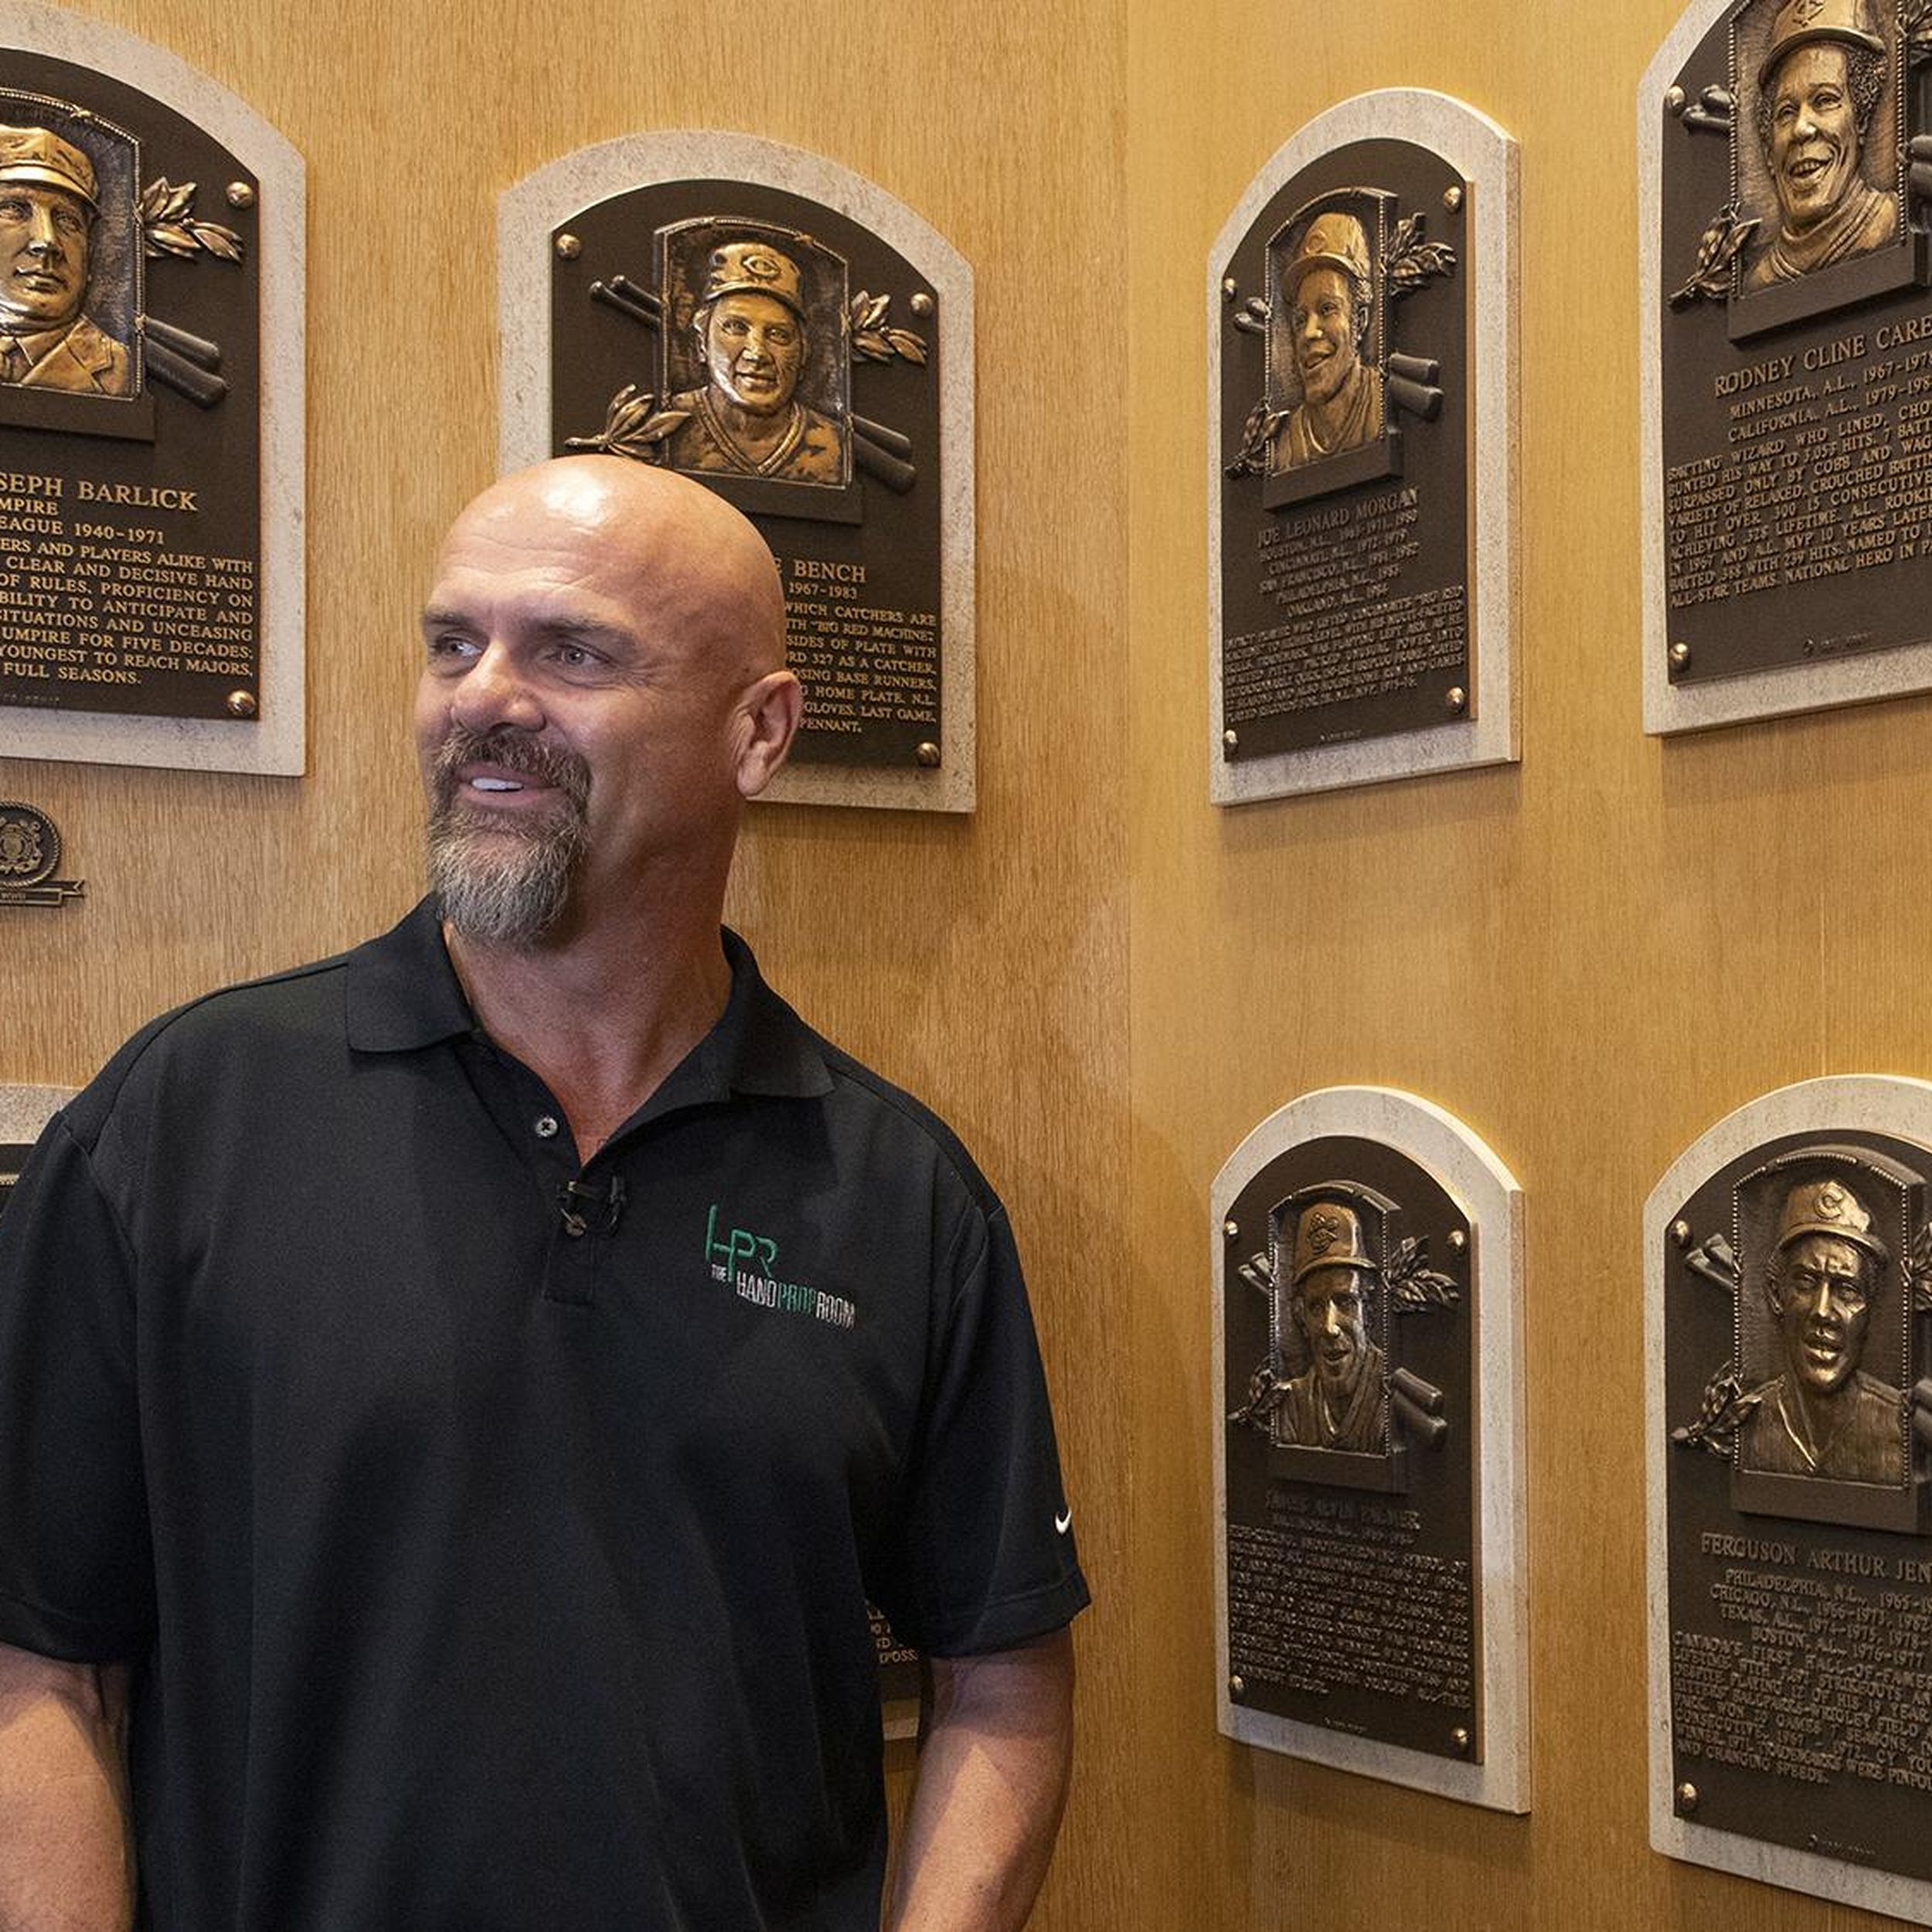 Hall of Fame: The Case For Former All Star and MVP Larry Walker